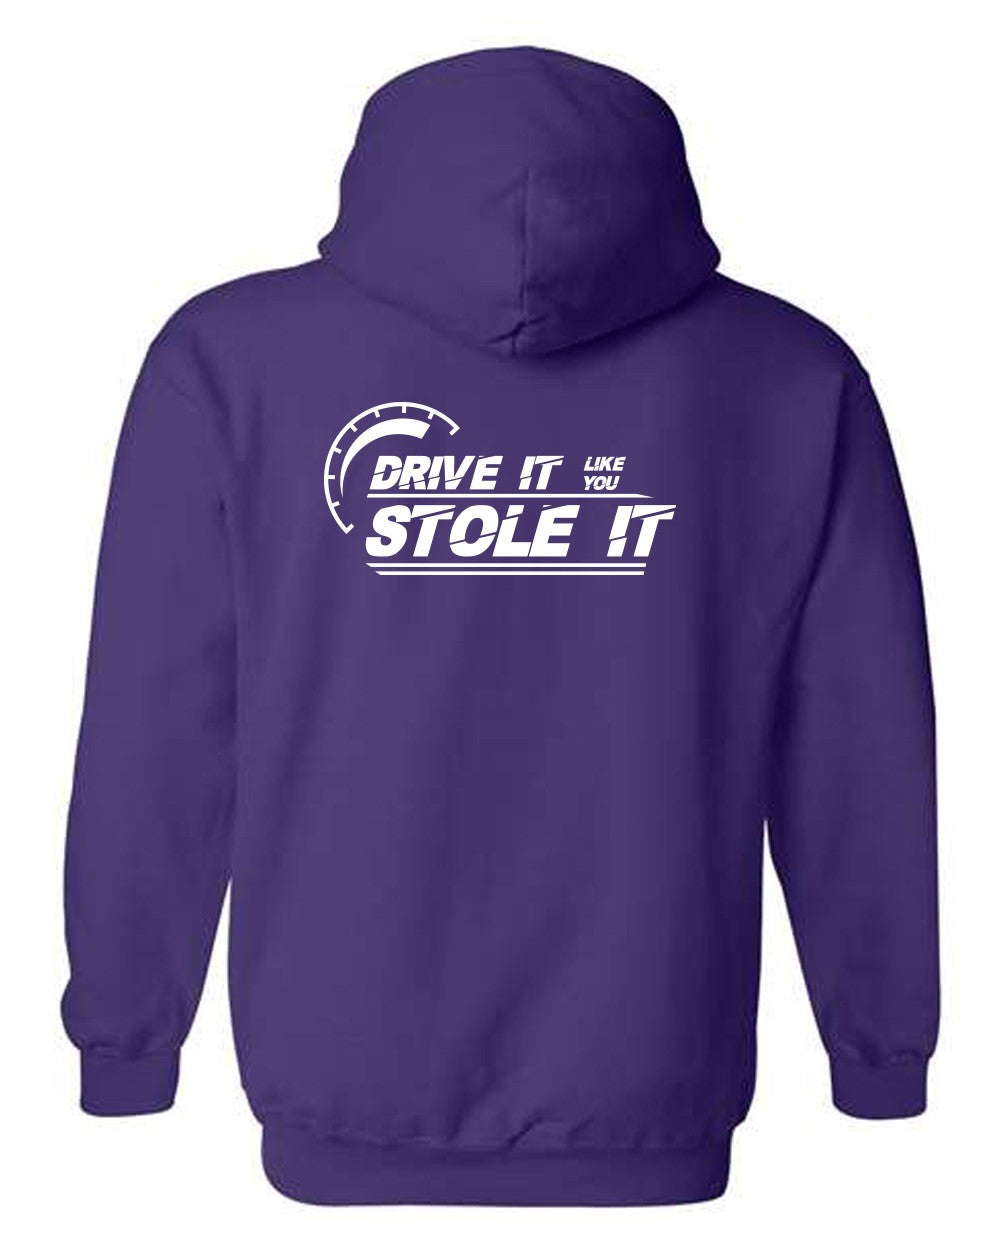 Drive it like you stole it Hoodie with White Logo